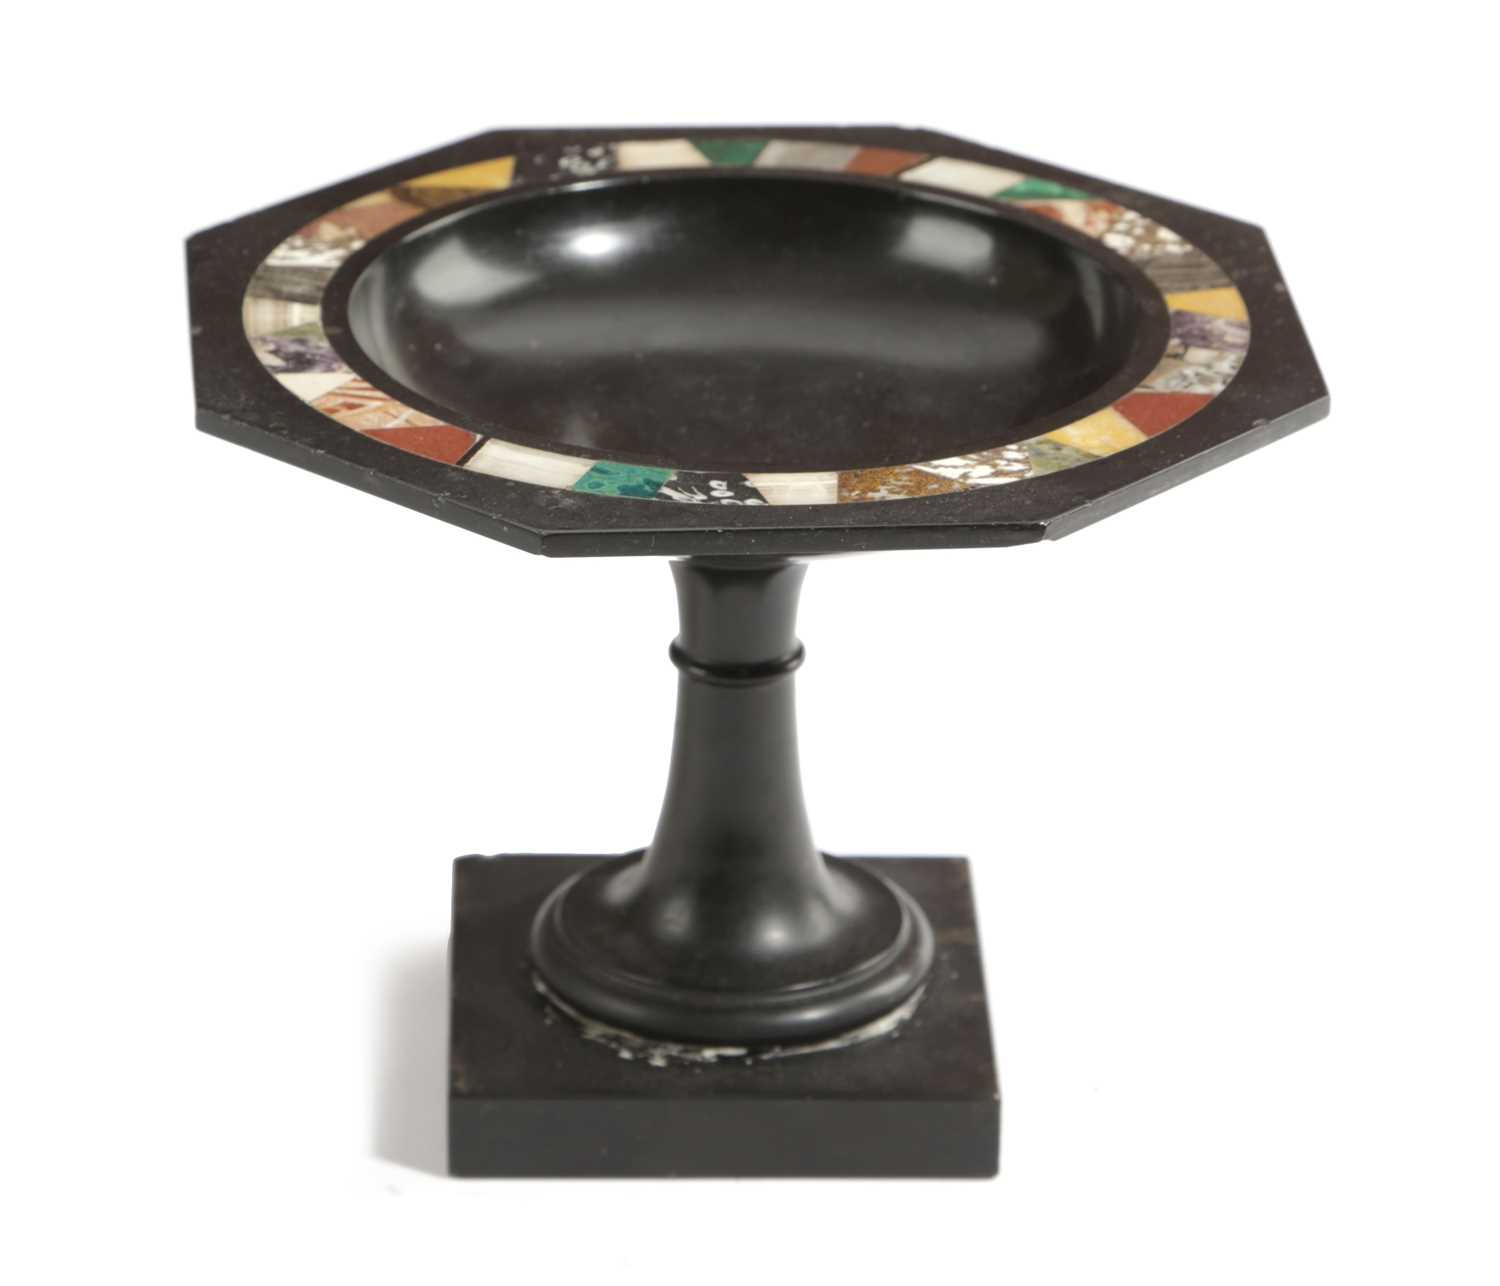 A VICTORIAN ASHFORD BLACK MARBLE AND PIETRA DURA TAZZA LATE 19TH CENTURY inlaid with a band of